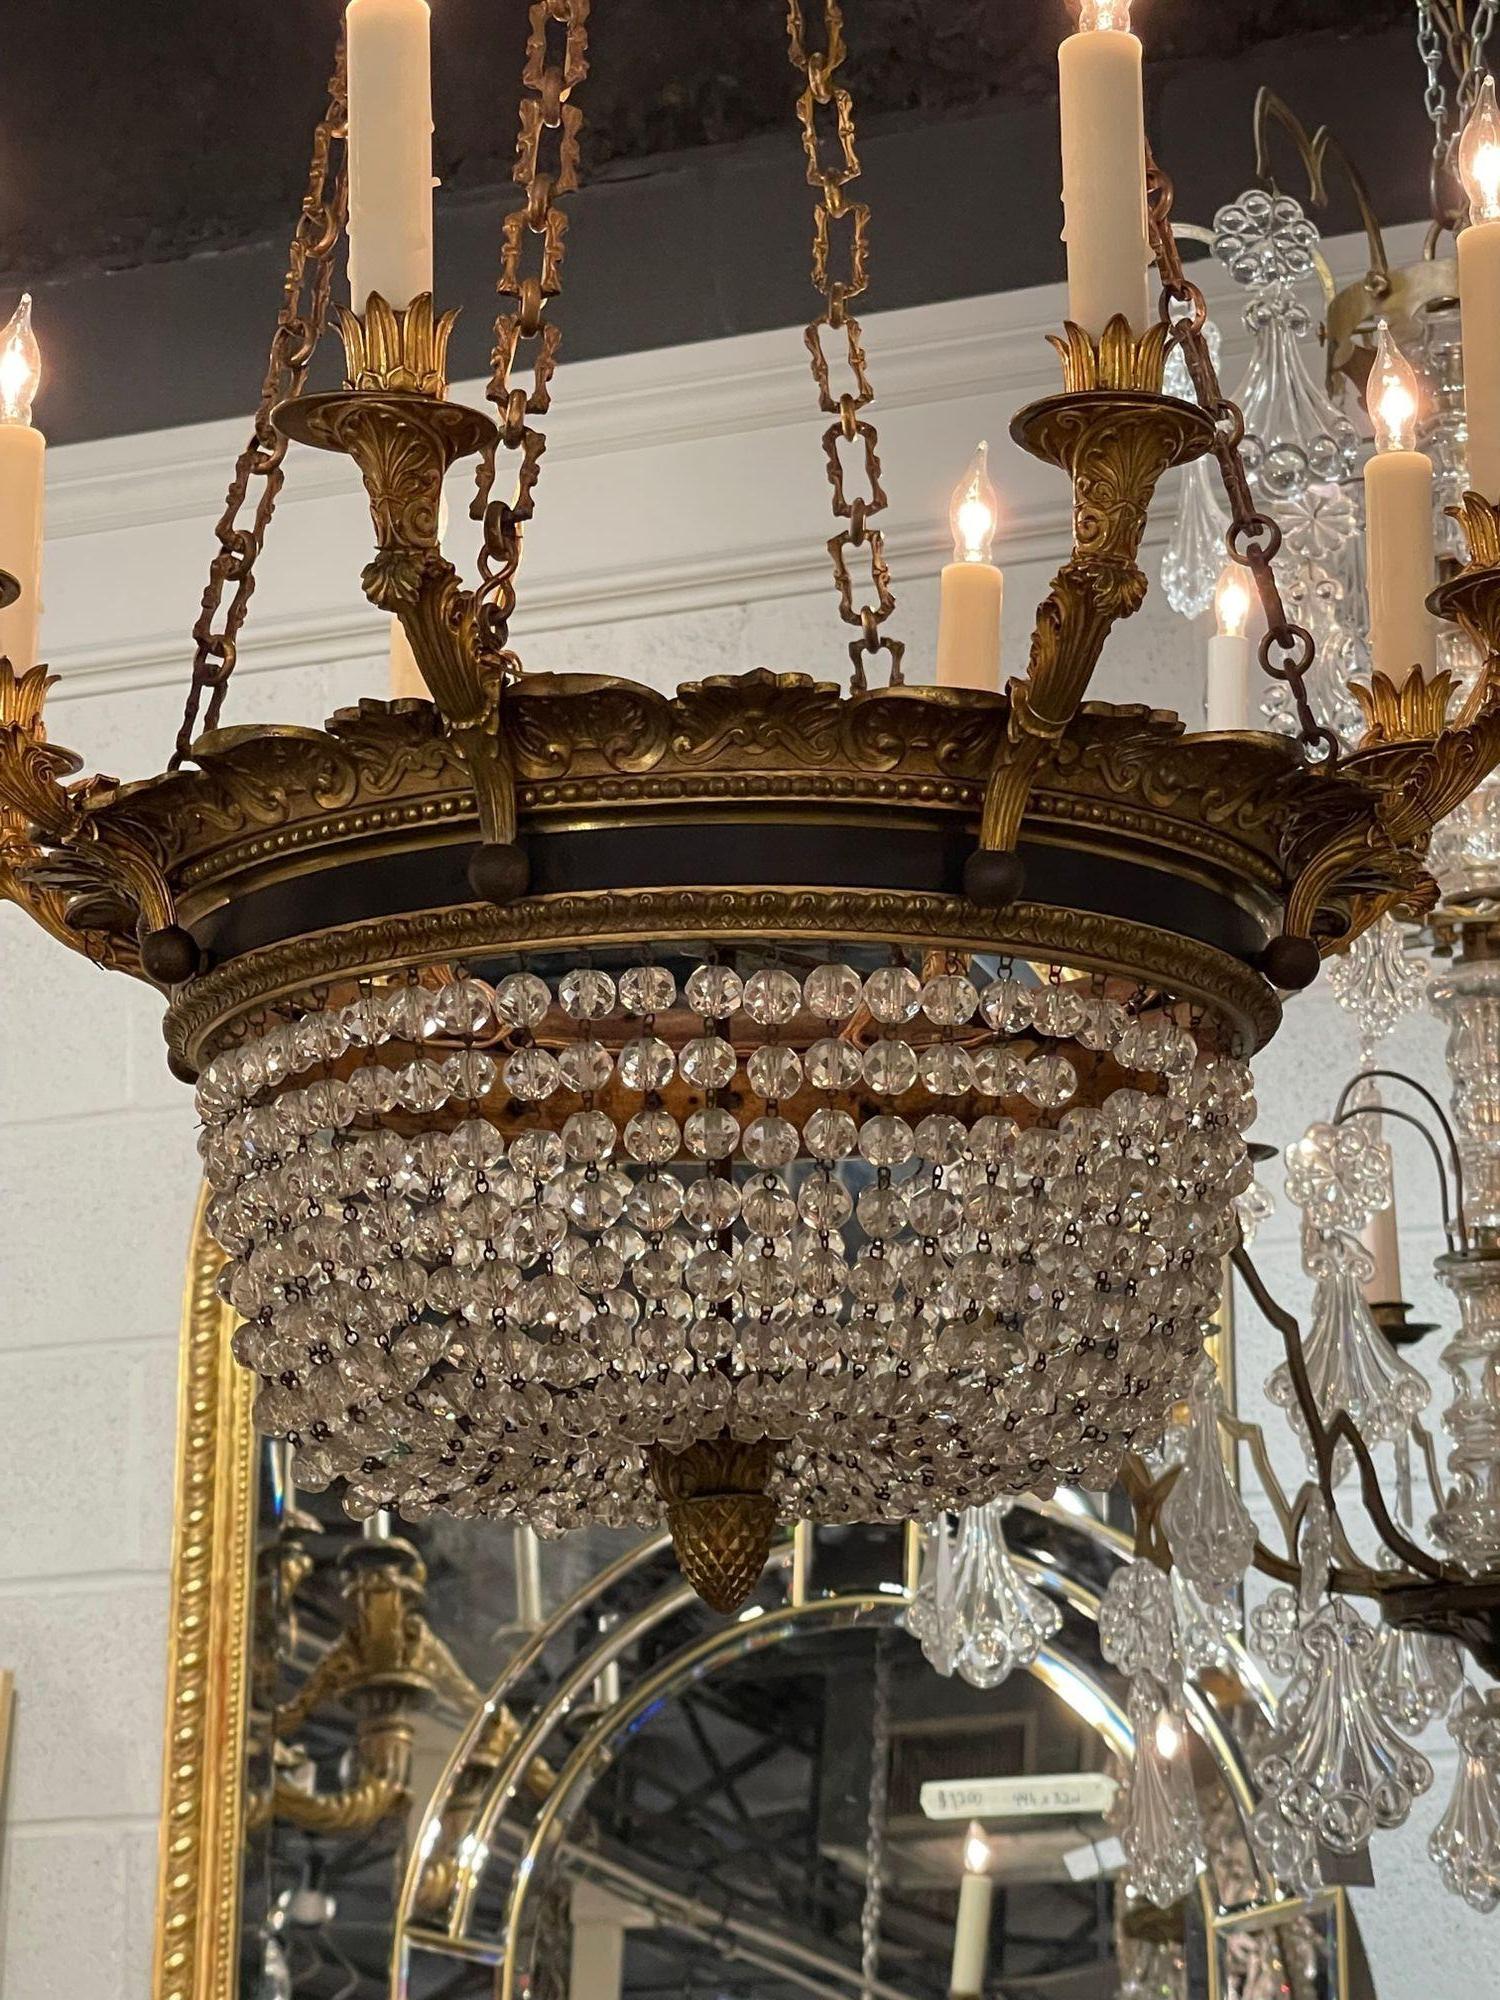 19th Century French Empire Basket Style Chandelier In Good Condition For Sale In Dallas, TX